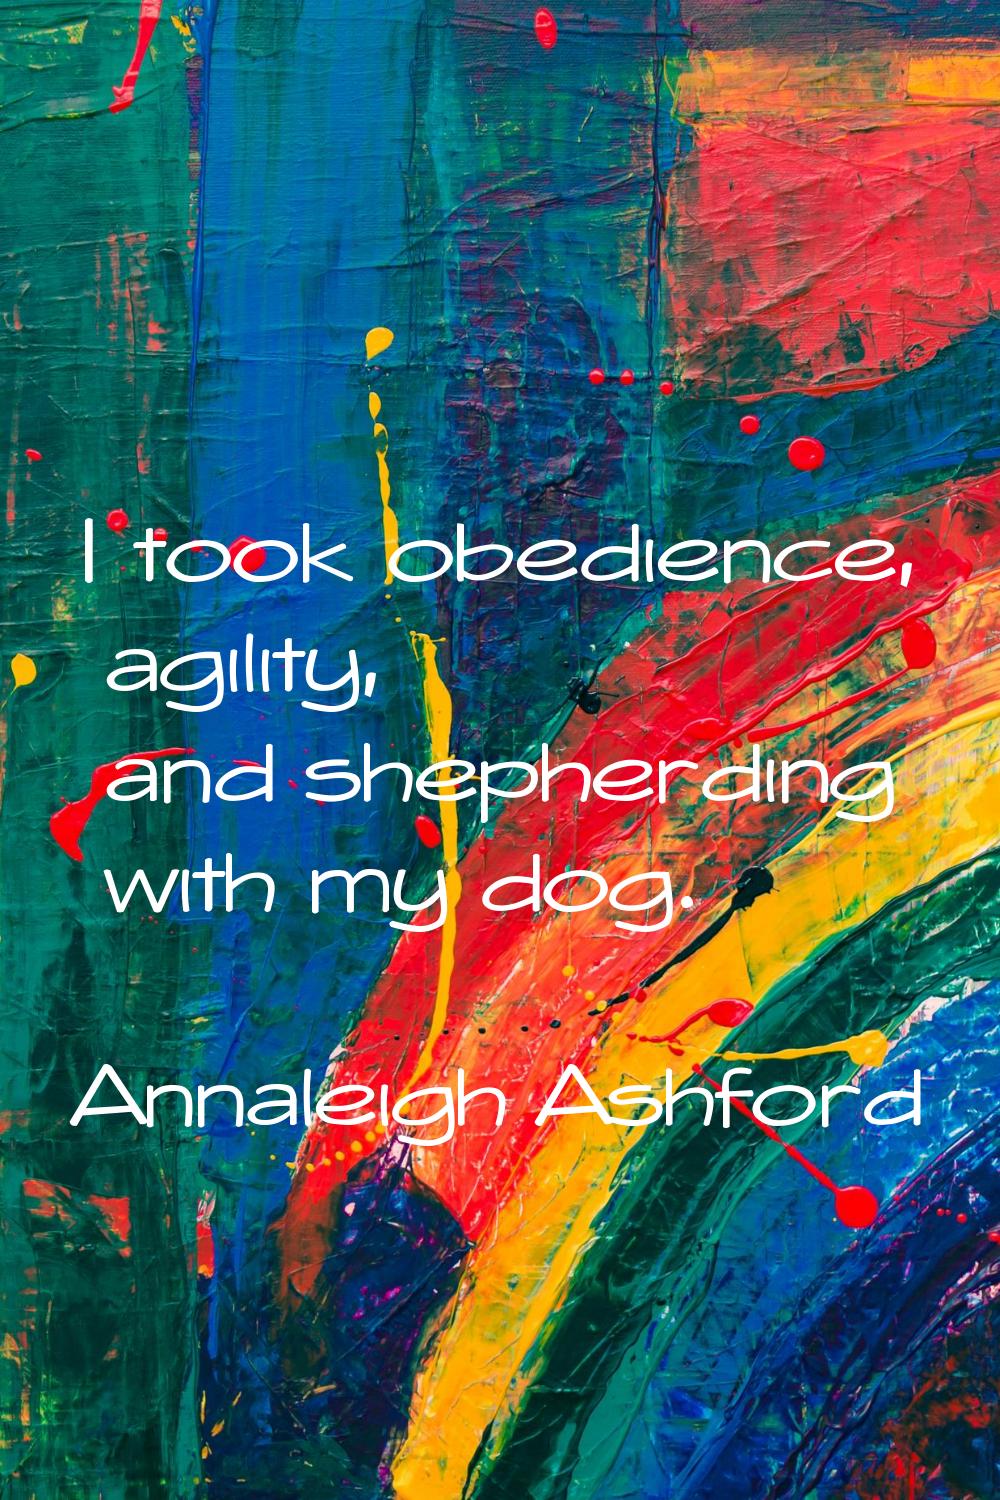 I took obedience, agility, and shepherding with my dog.